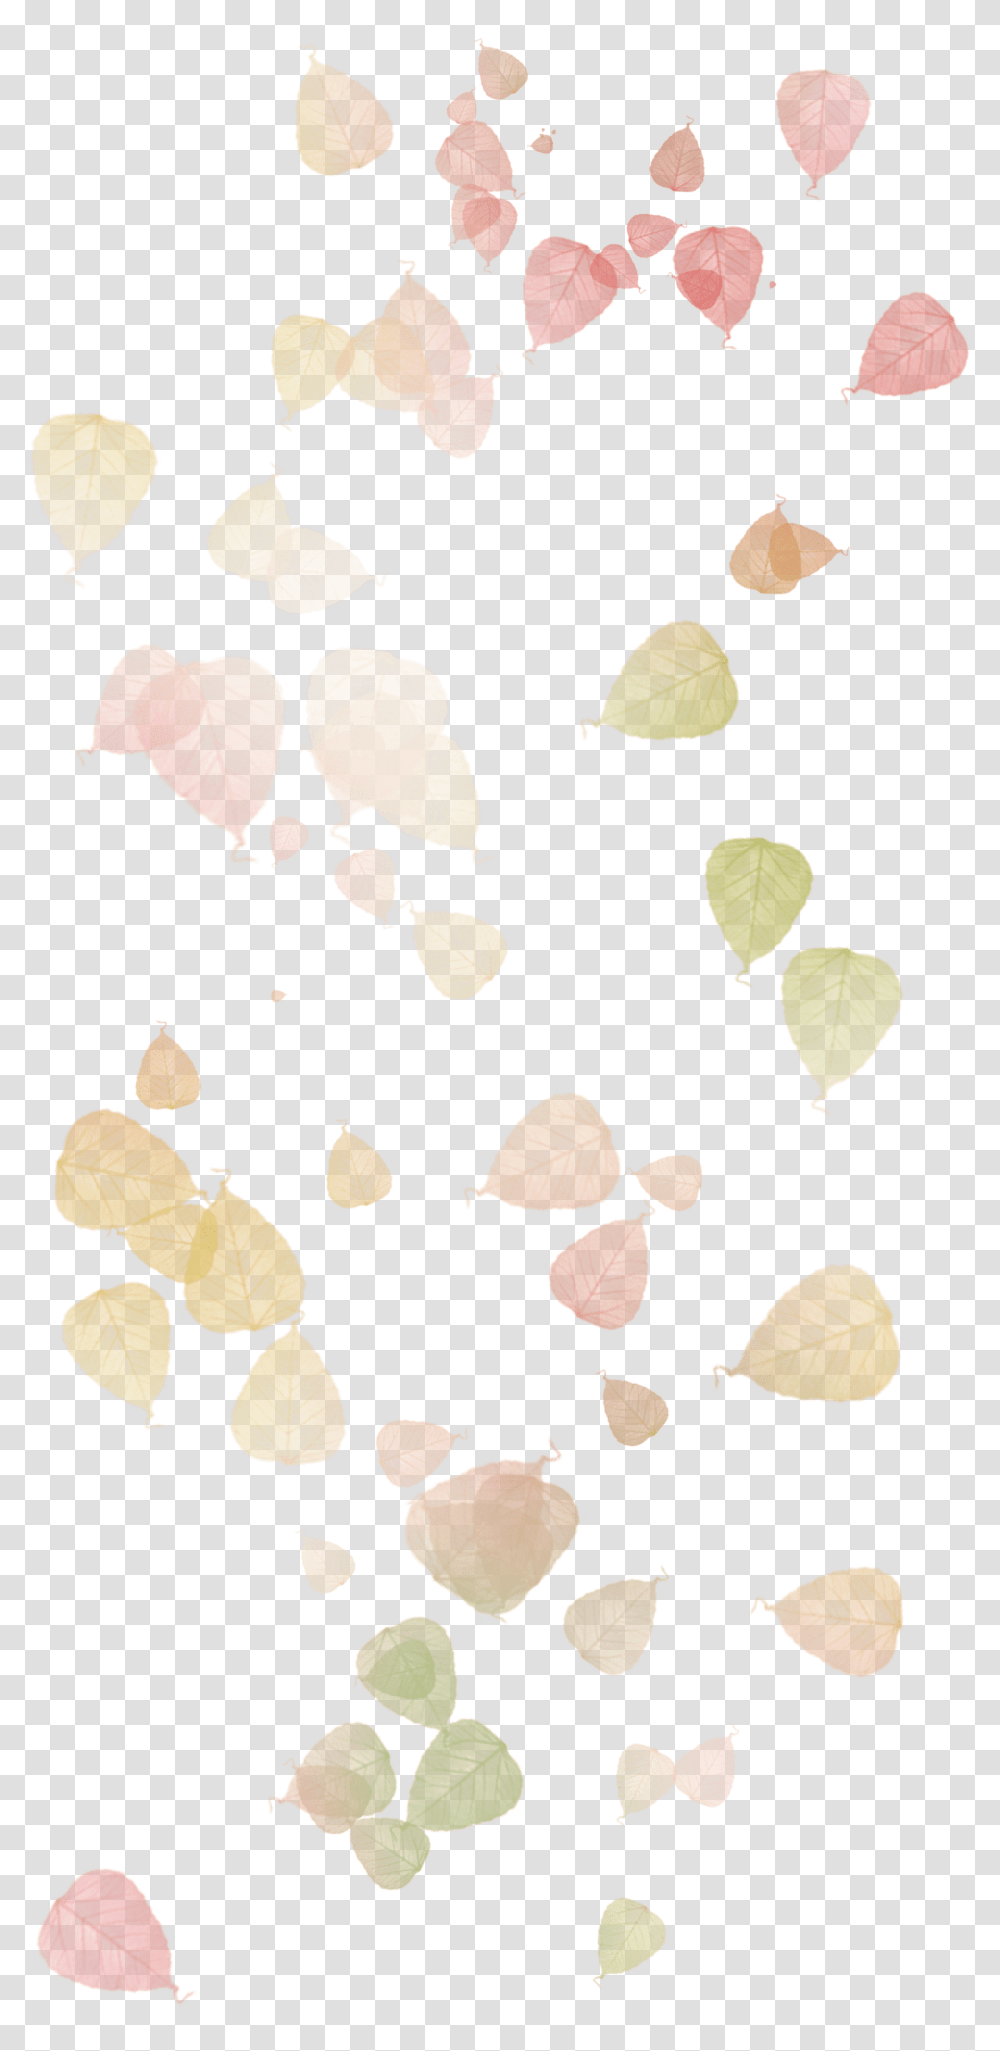 Autumn Leaves Leaf Watercolor Painting Watercolor Leaves Watercolor Painting, Plant, Grain, Produce, Vegetable Transparent Png